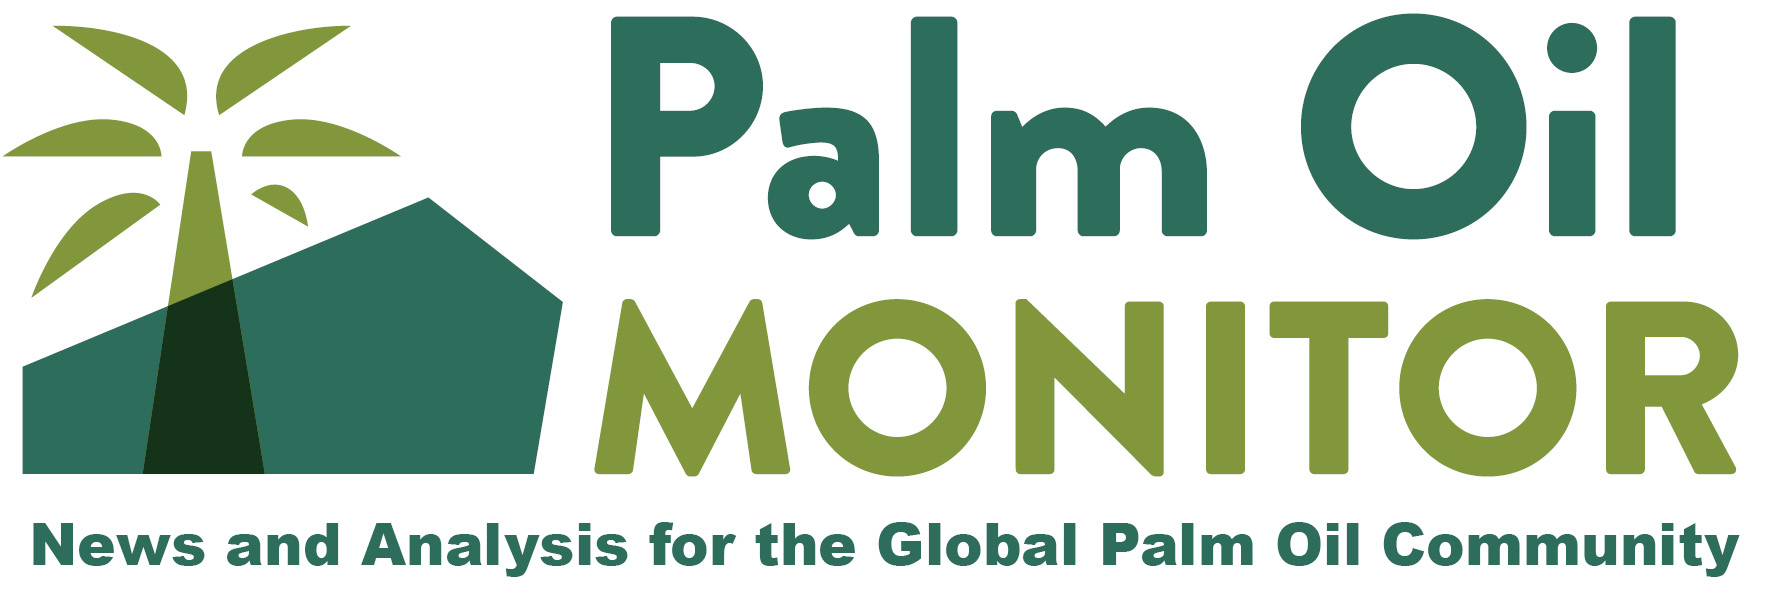 Palm Oil Monitor